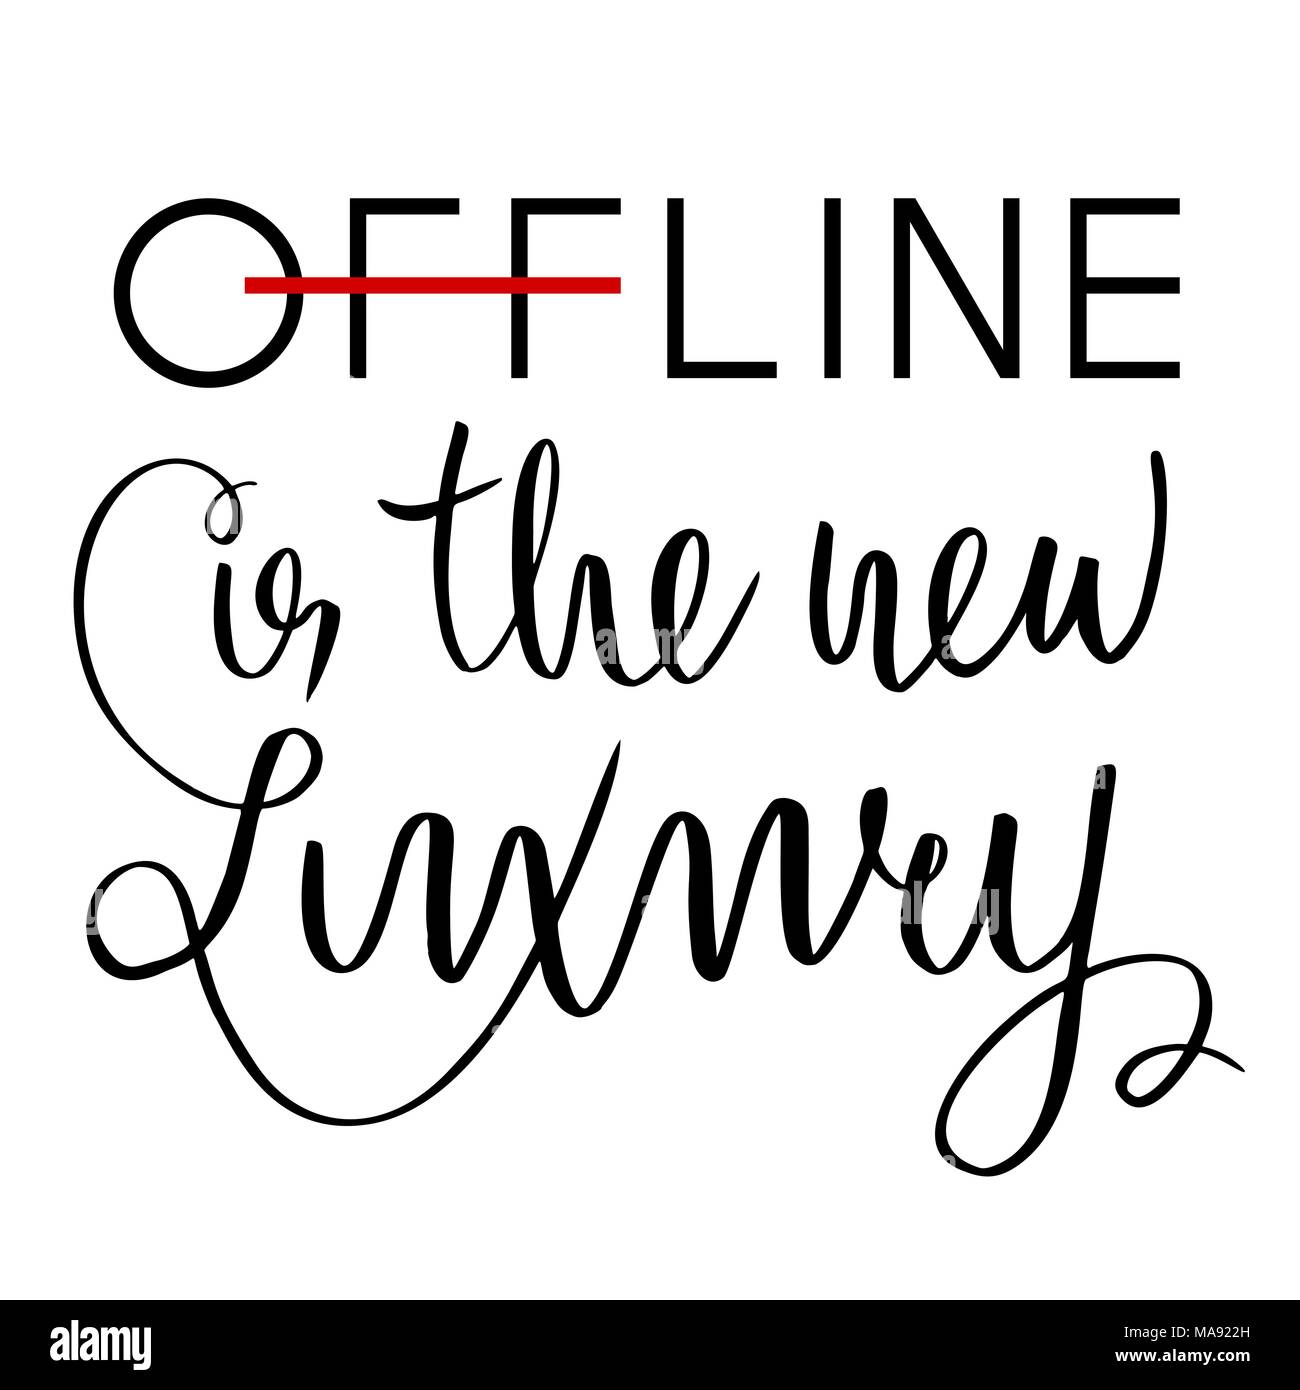 Offline is the new luxury. Inspirational saying about internet and social media. Ink pen, brush. Stock Vector